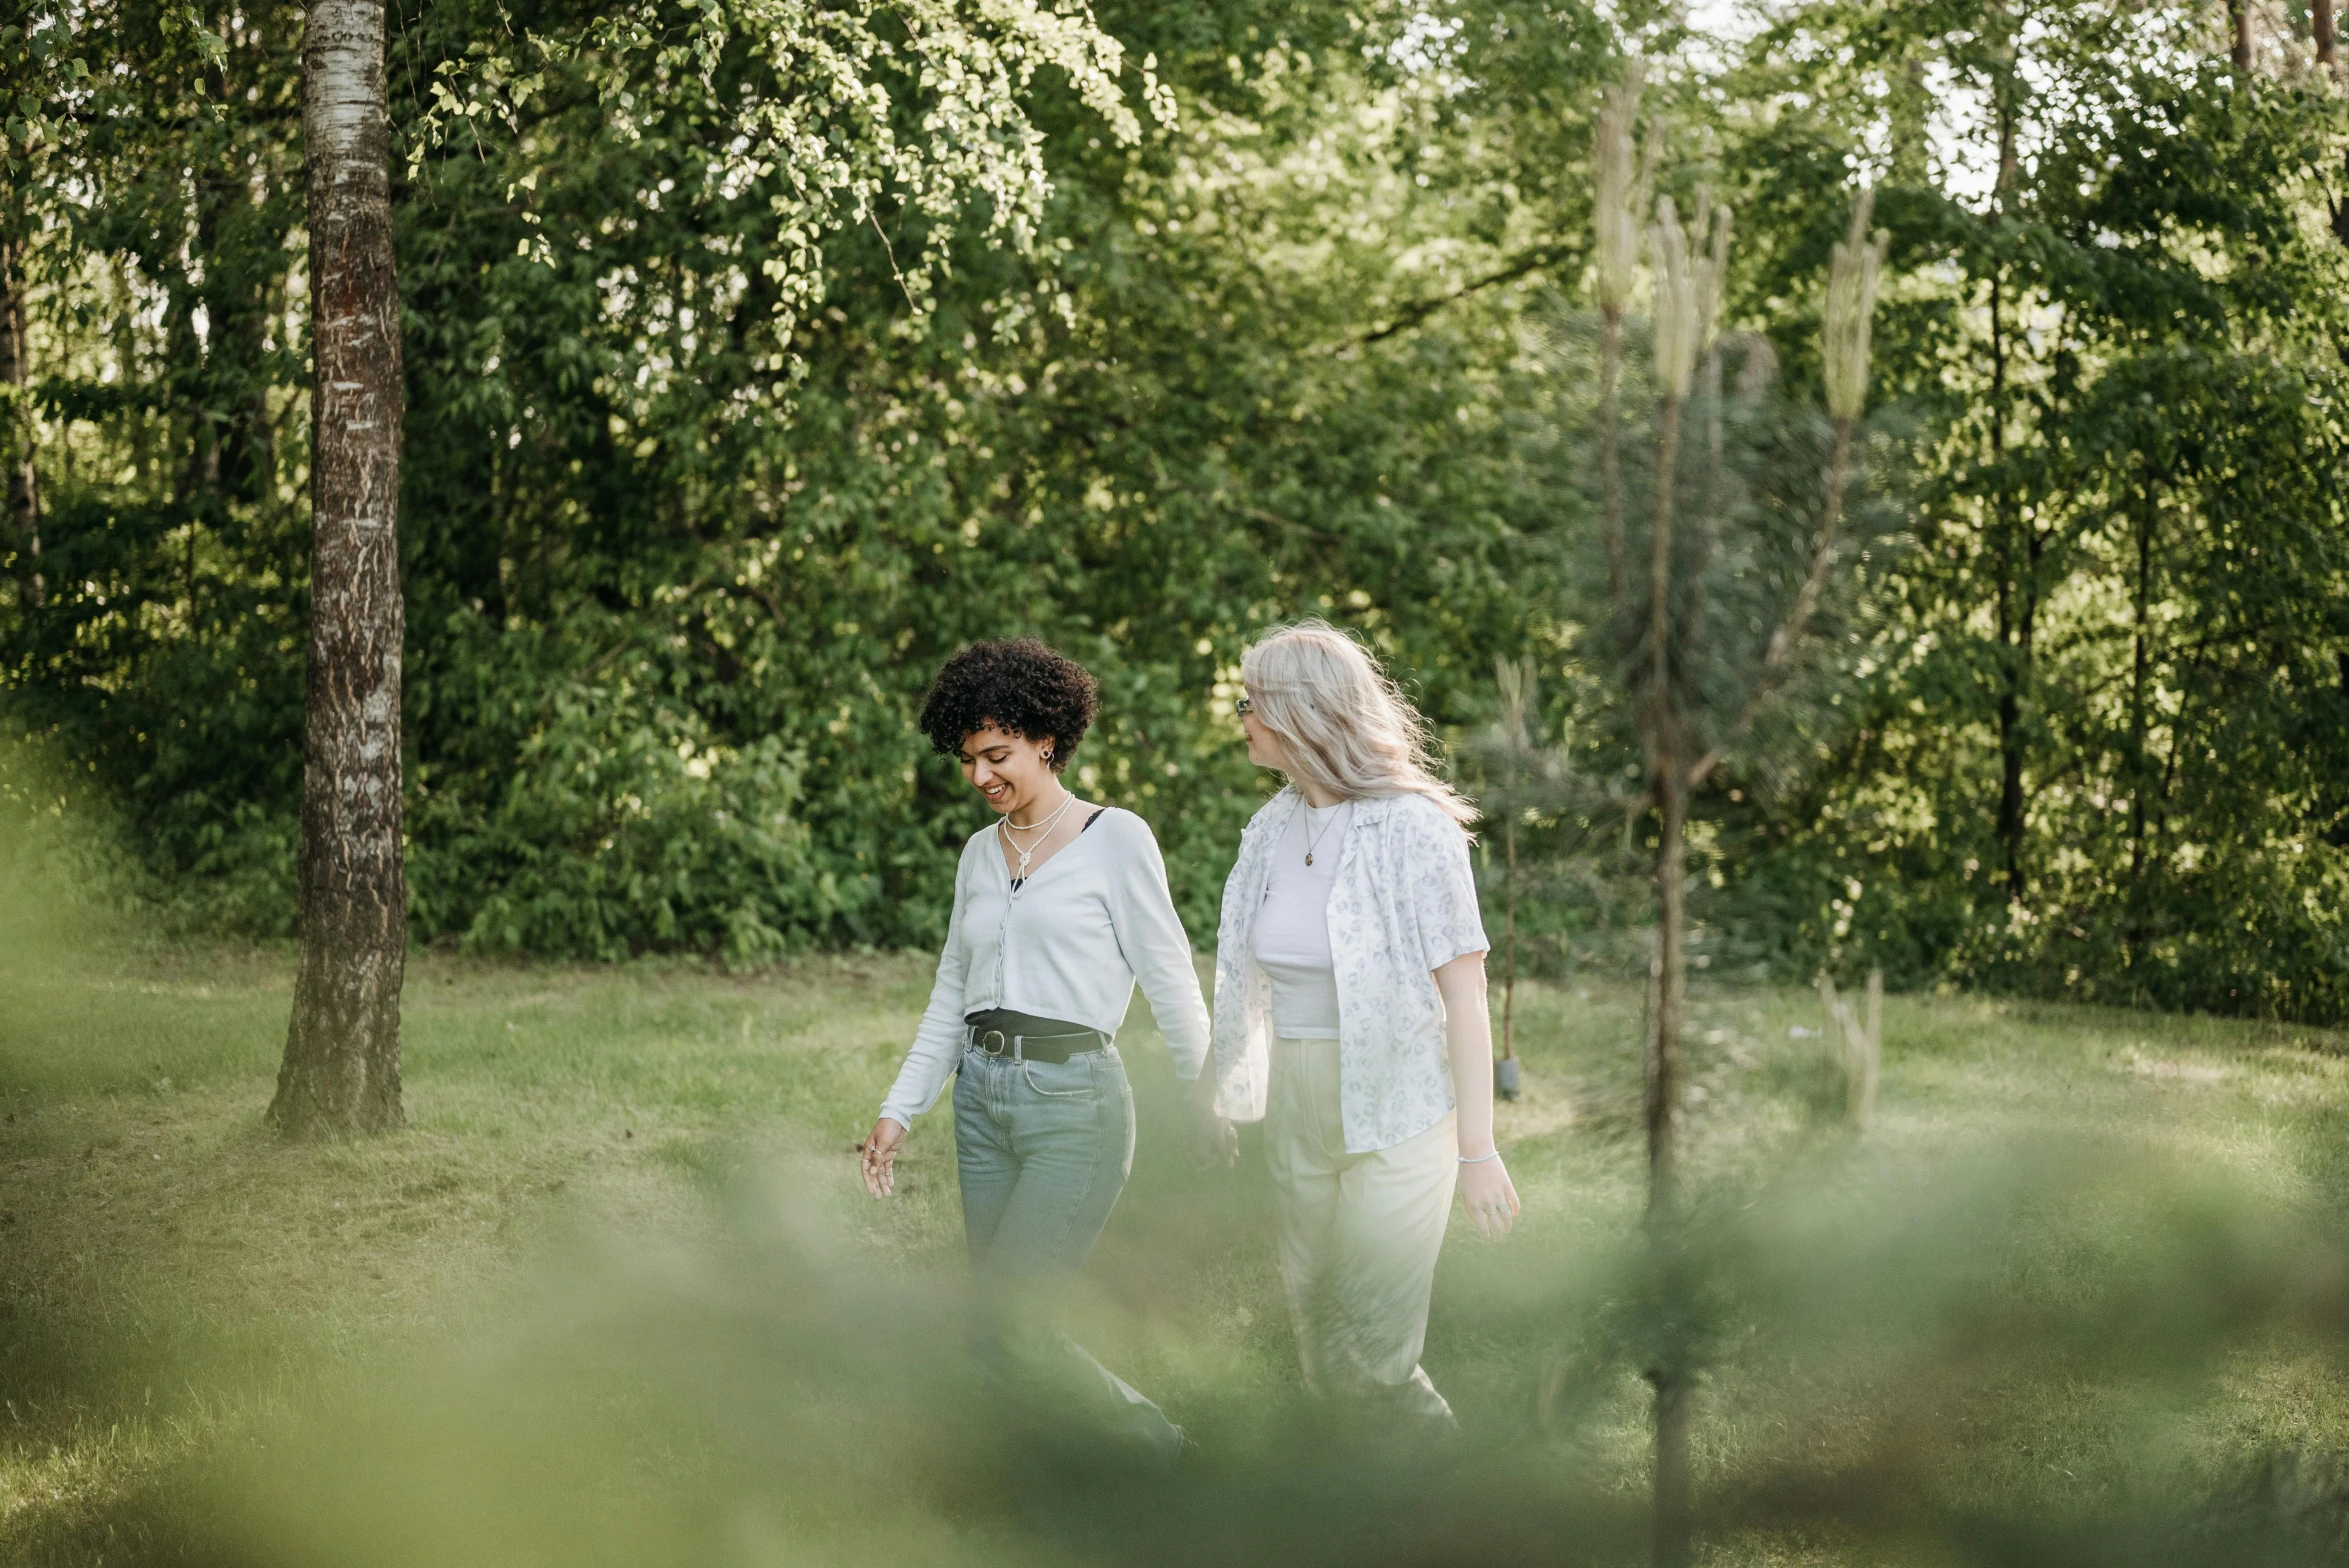 two women holding hands walking in a wooded area